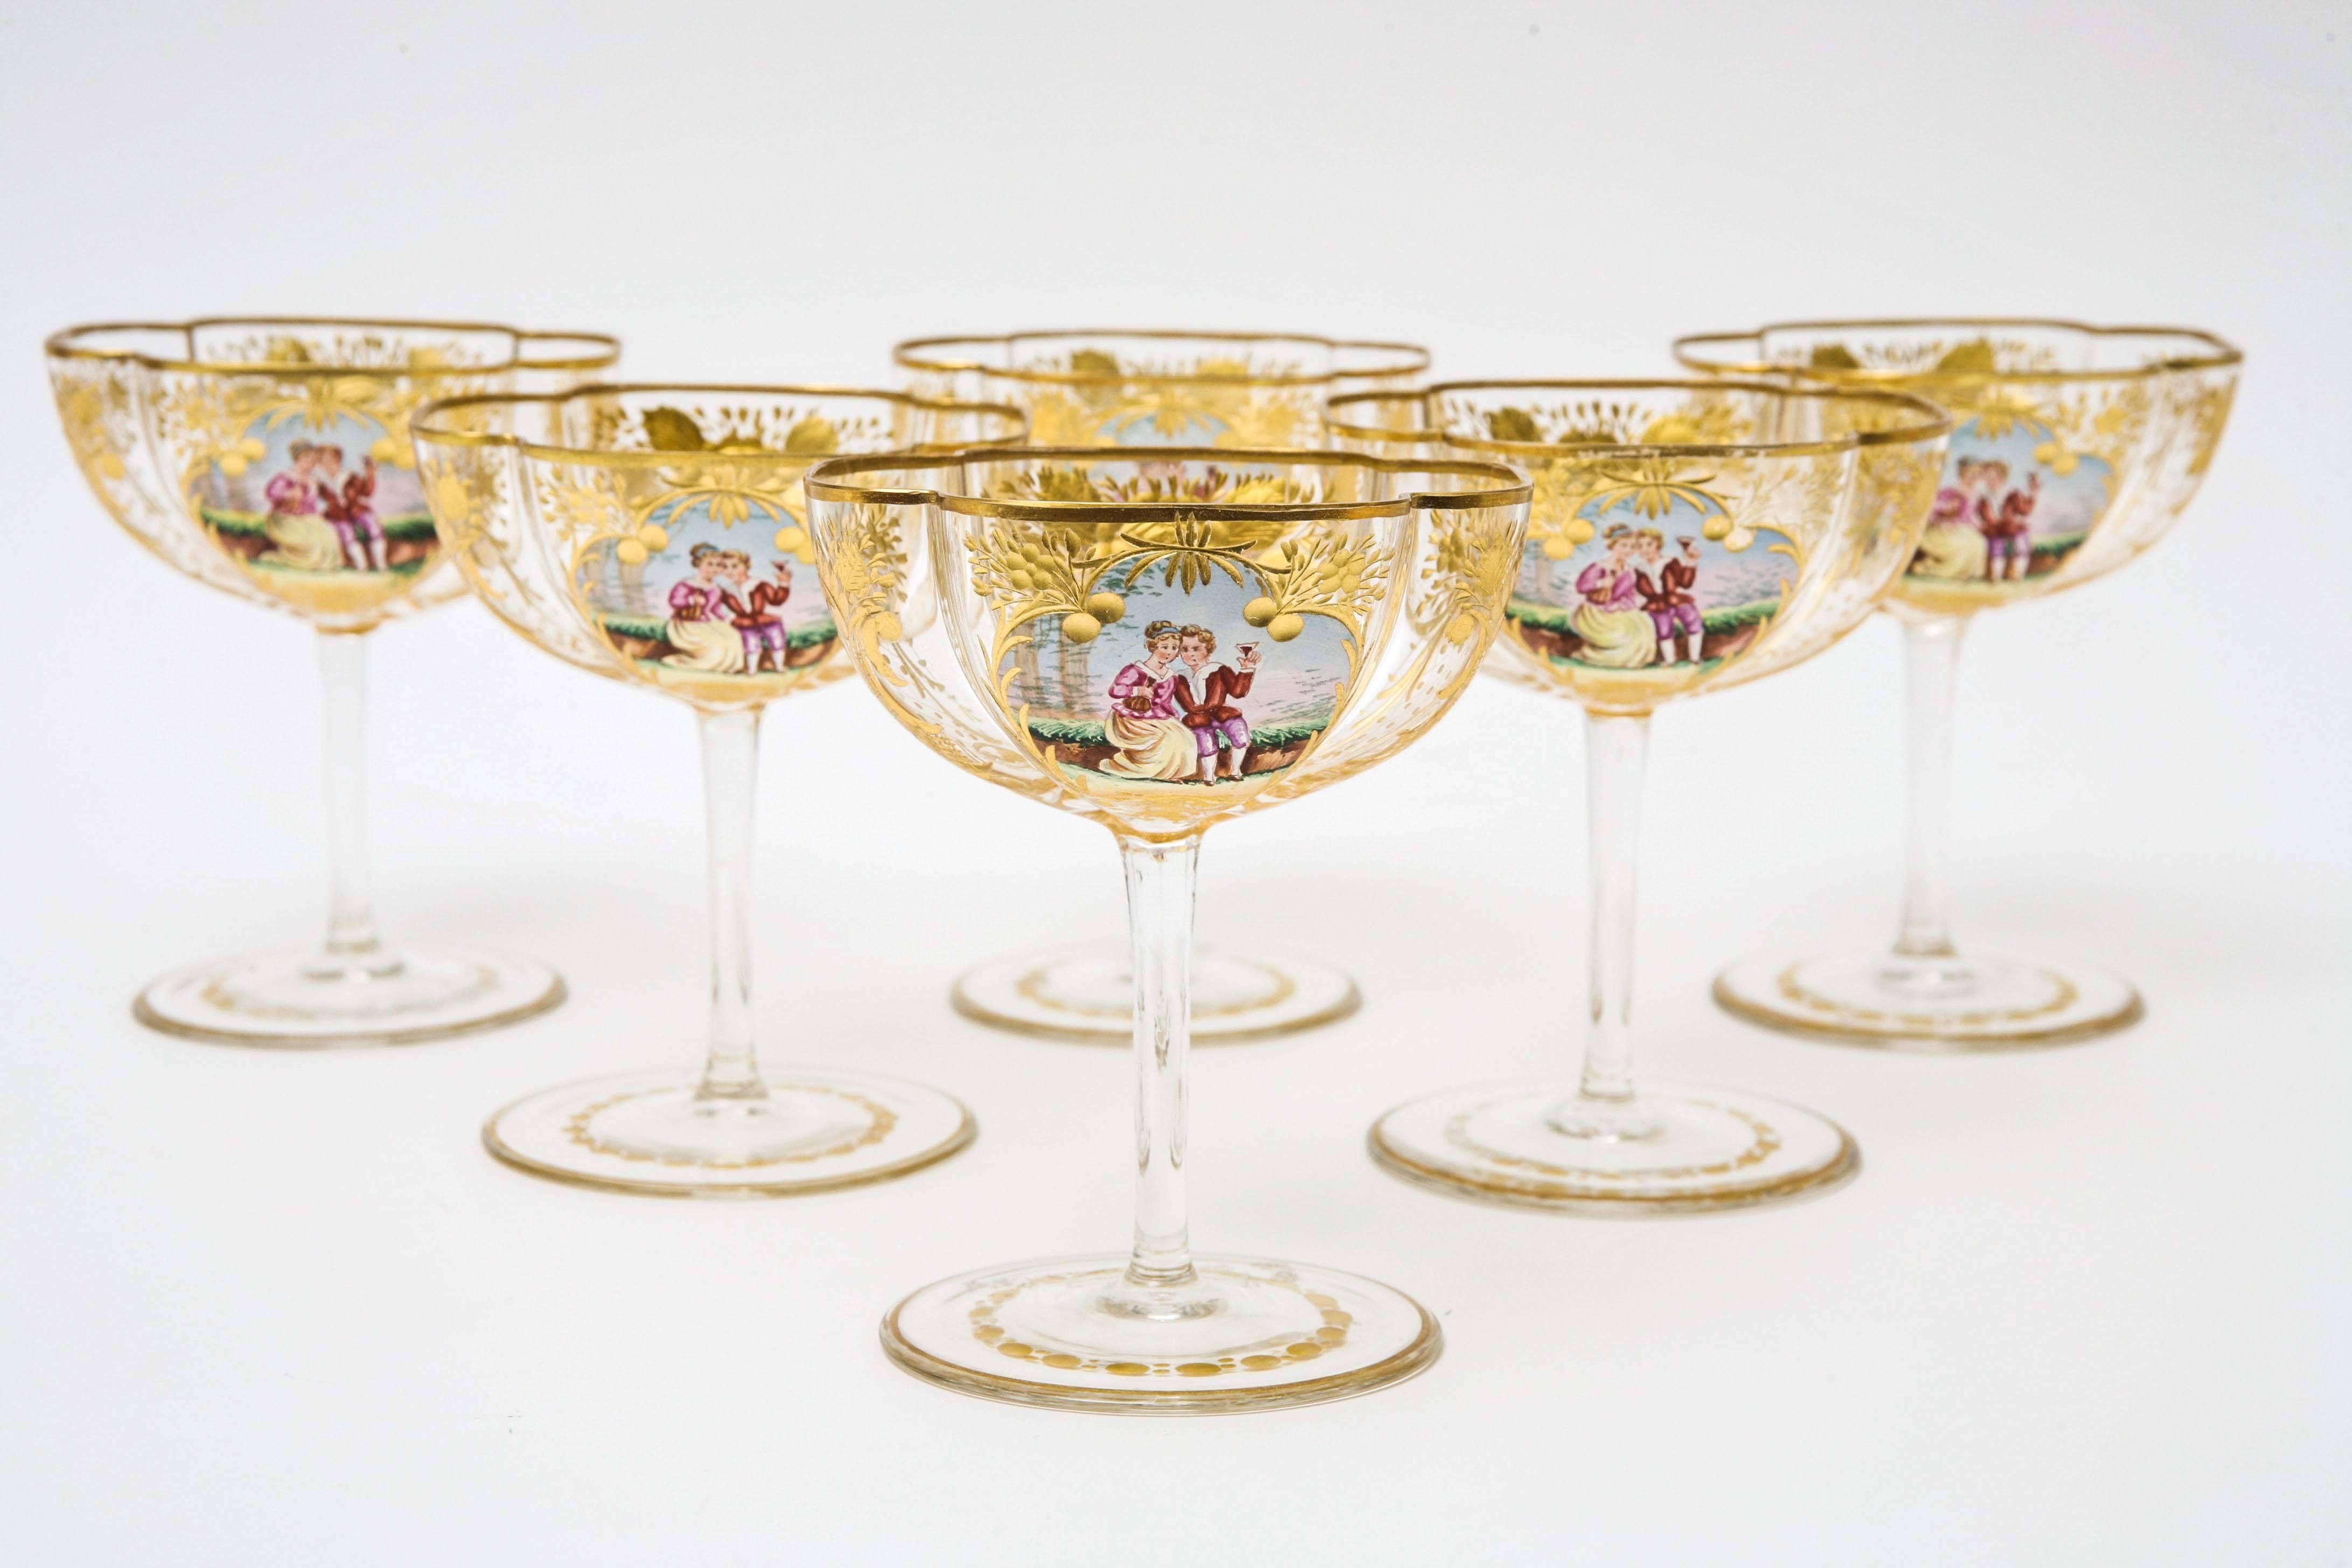 A delightful set of six antique champagne glasses attributed to the Moser factory. One of their signature shapes with beautifully cut and gilded all-over design and cartouches of romantic scenery. These precious pieces have matching wine glasses